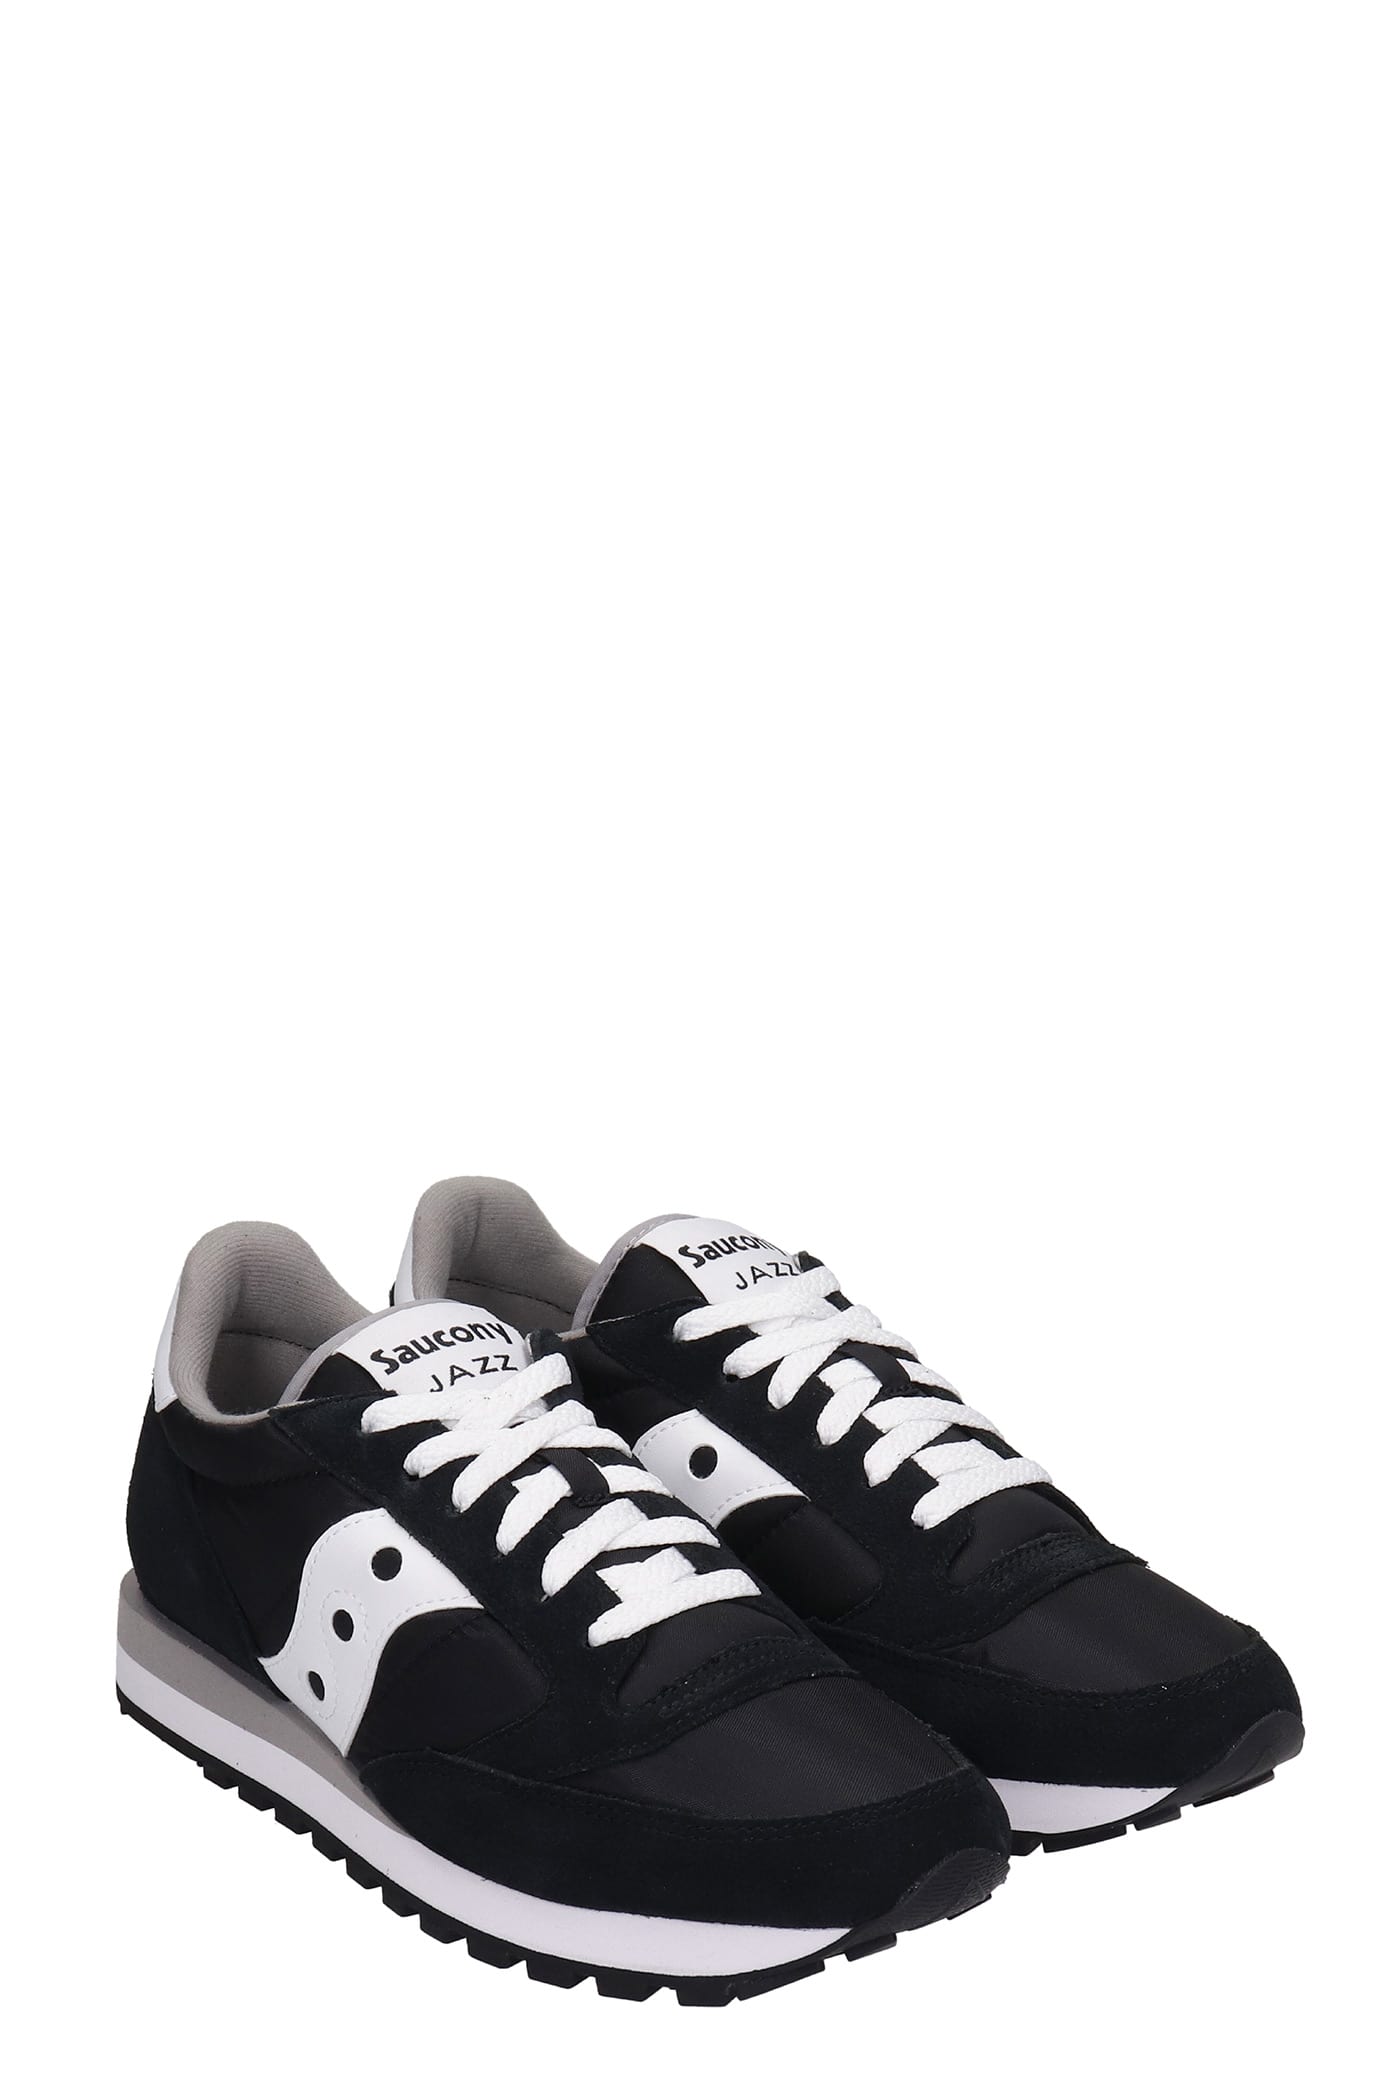 Shop Saucony Jazz Original Sneakers In Black Suede And Fabric In Blk/wht